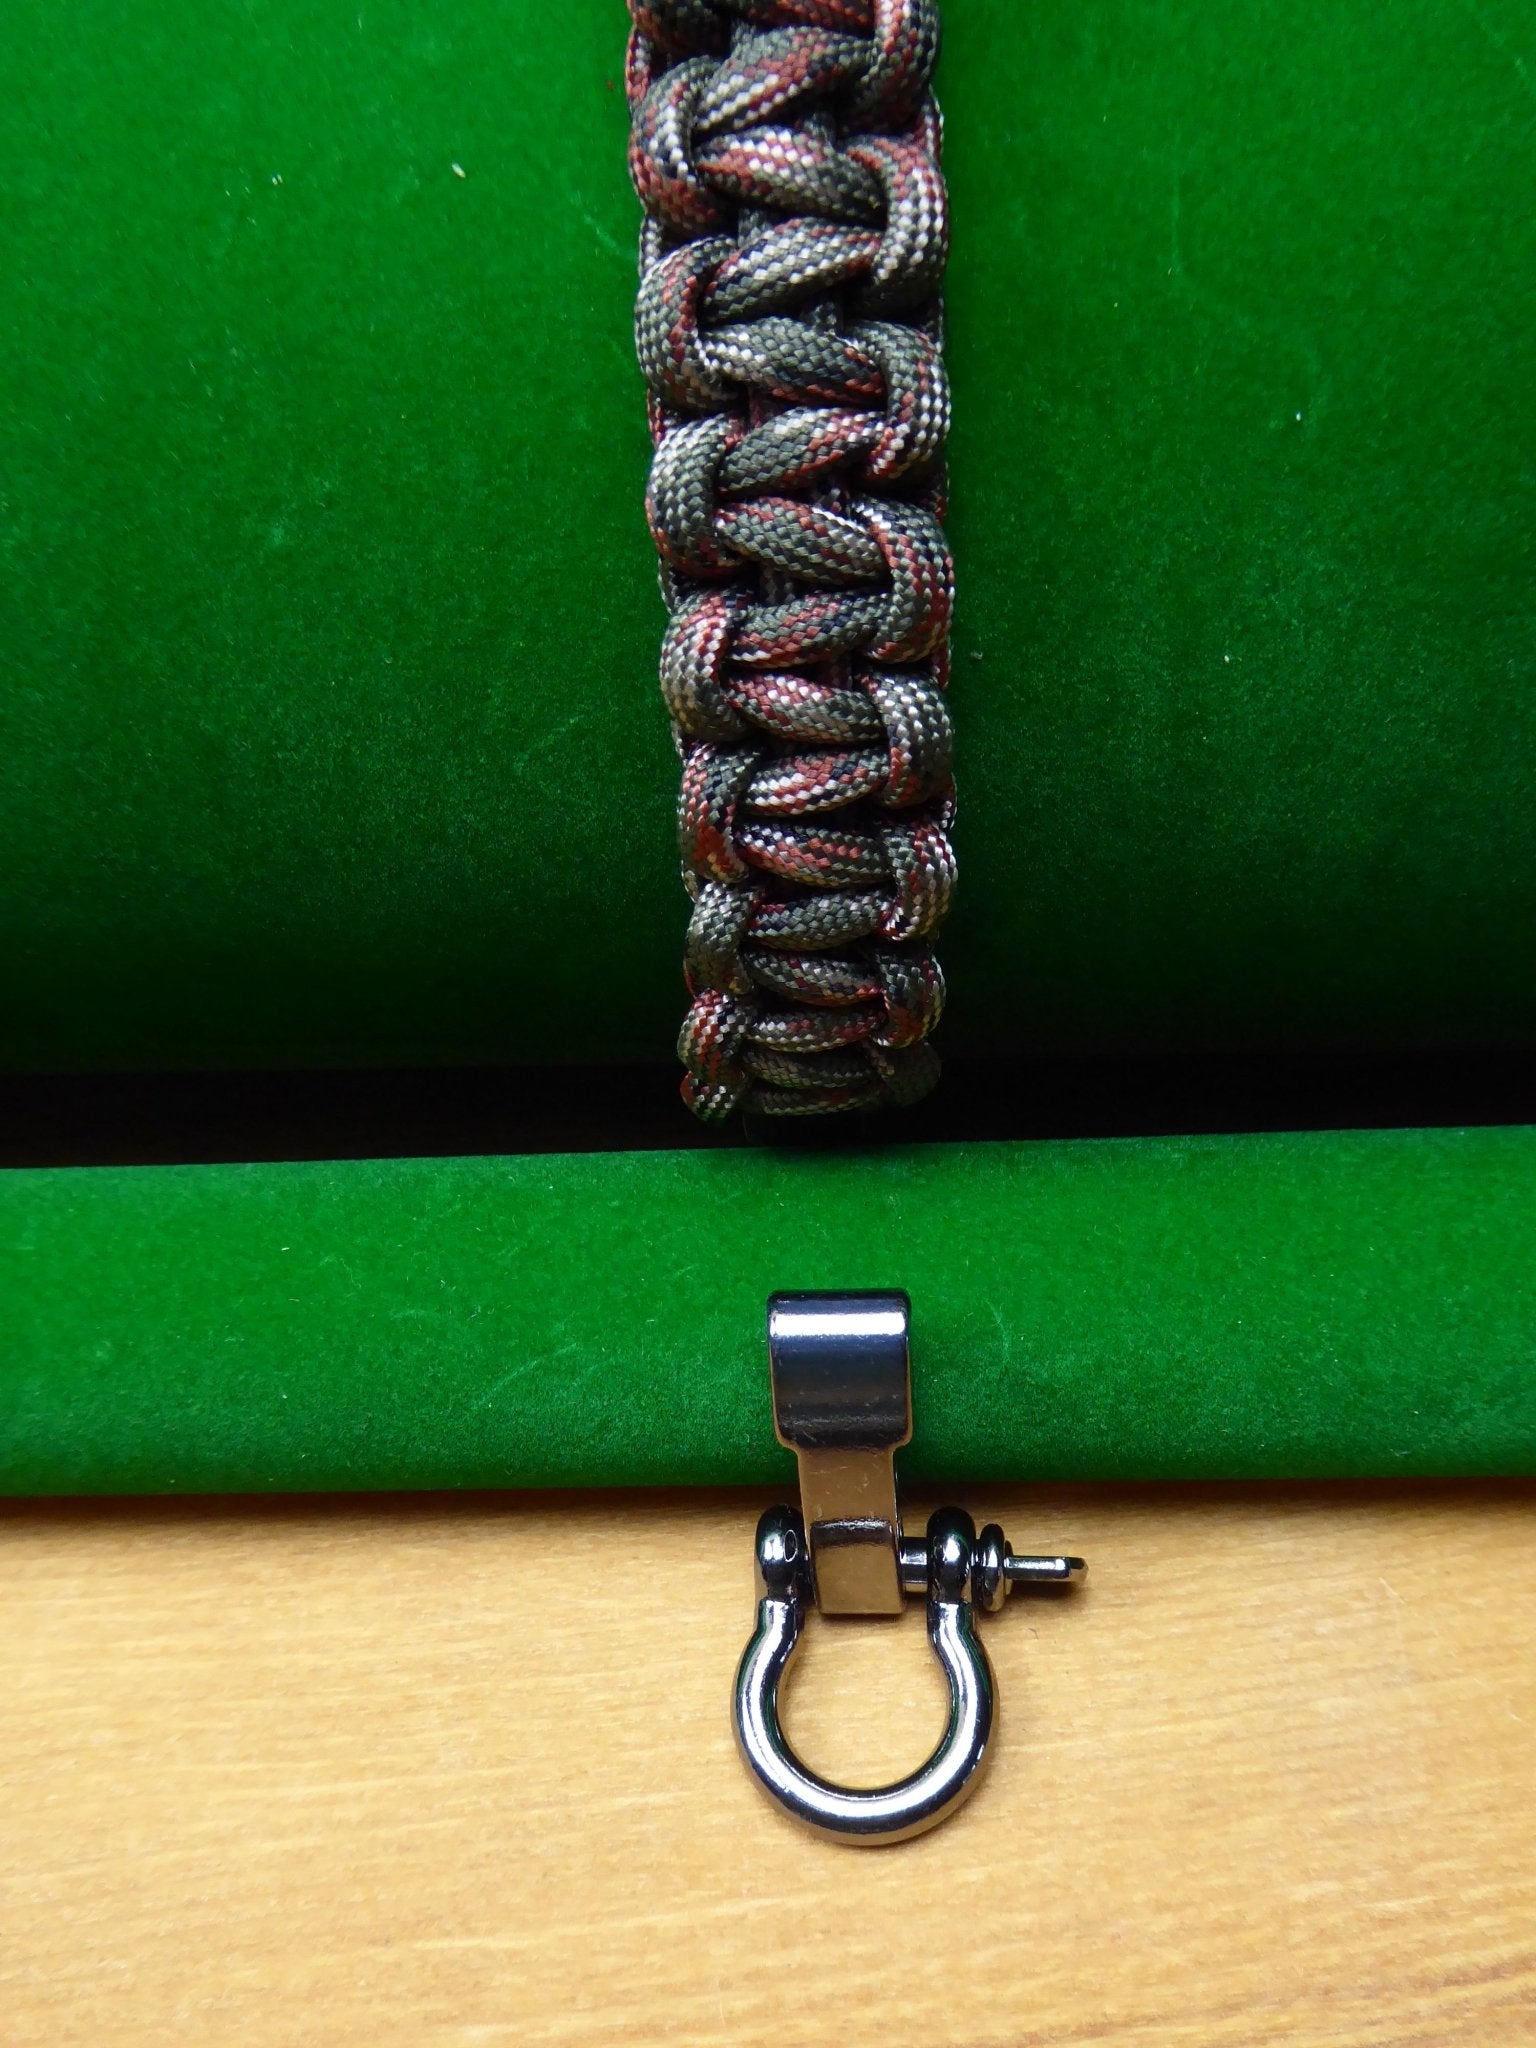 Paracord Buckle Bracelet kits with choice of colours Paracord Huggins Attic Army Camo Gun metal Buckle  [Huggins attic]